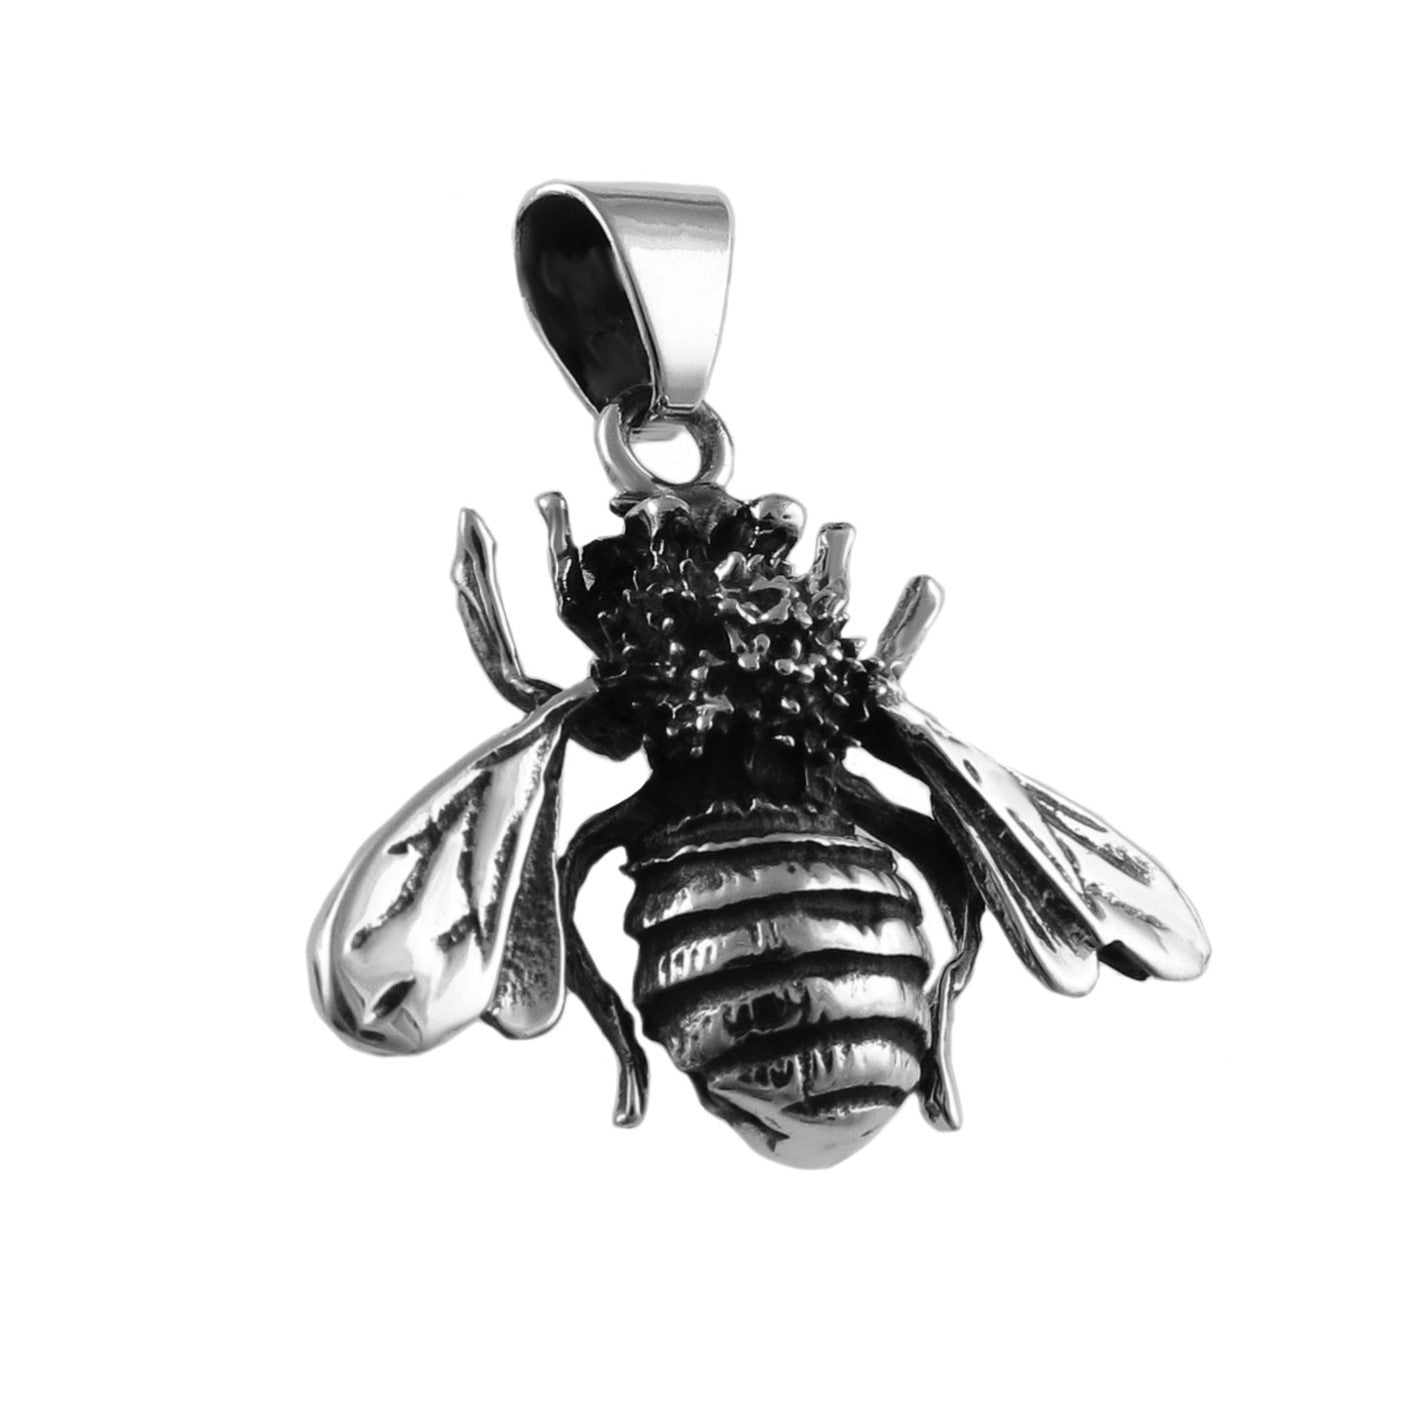 Tiny bumble bee necklace. Solid 925 sterling silver charm plated with 18k  gold, rose gold vermeil nature inspired jewellery. honey bee charm